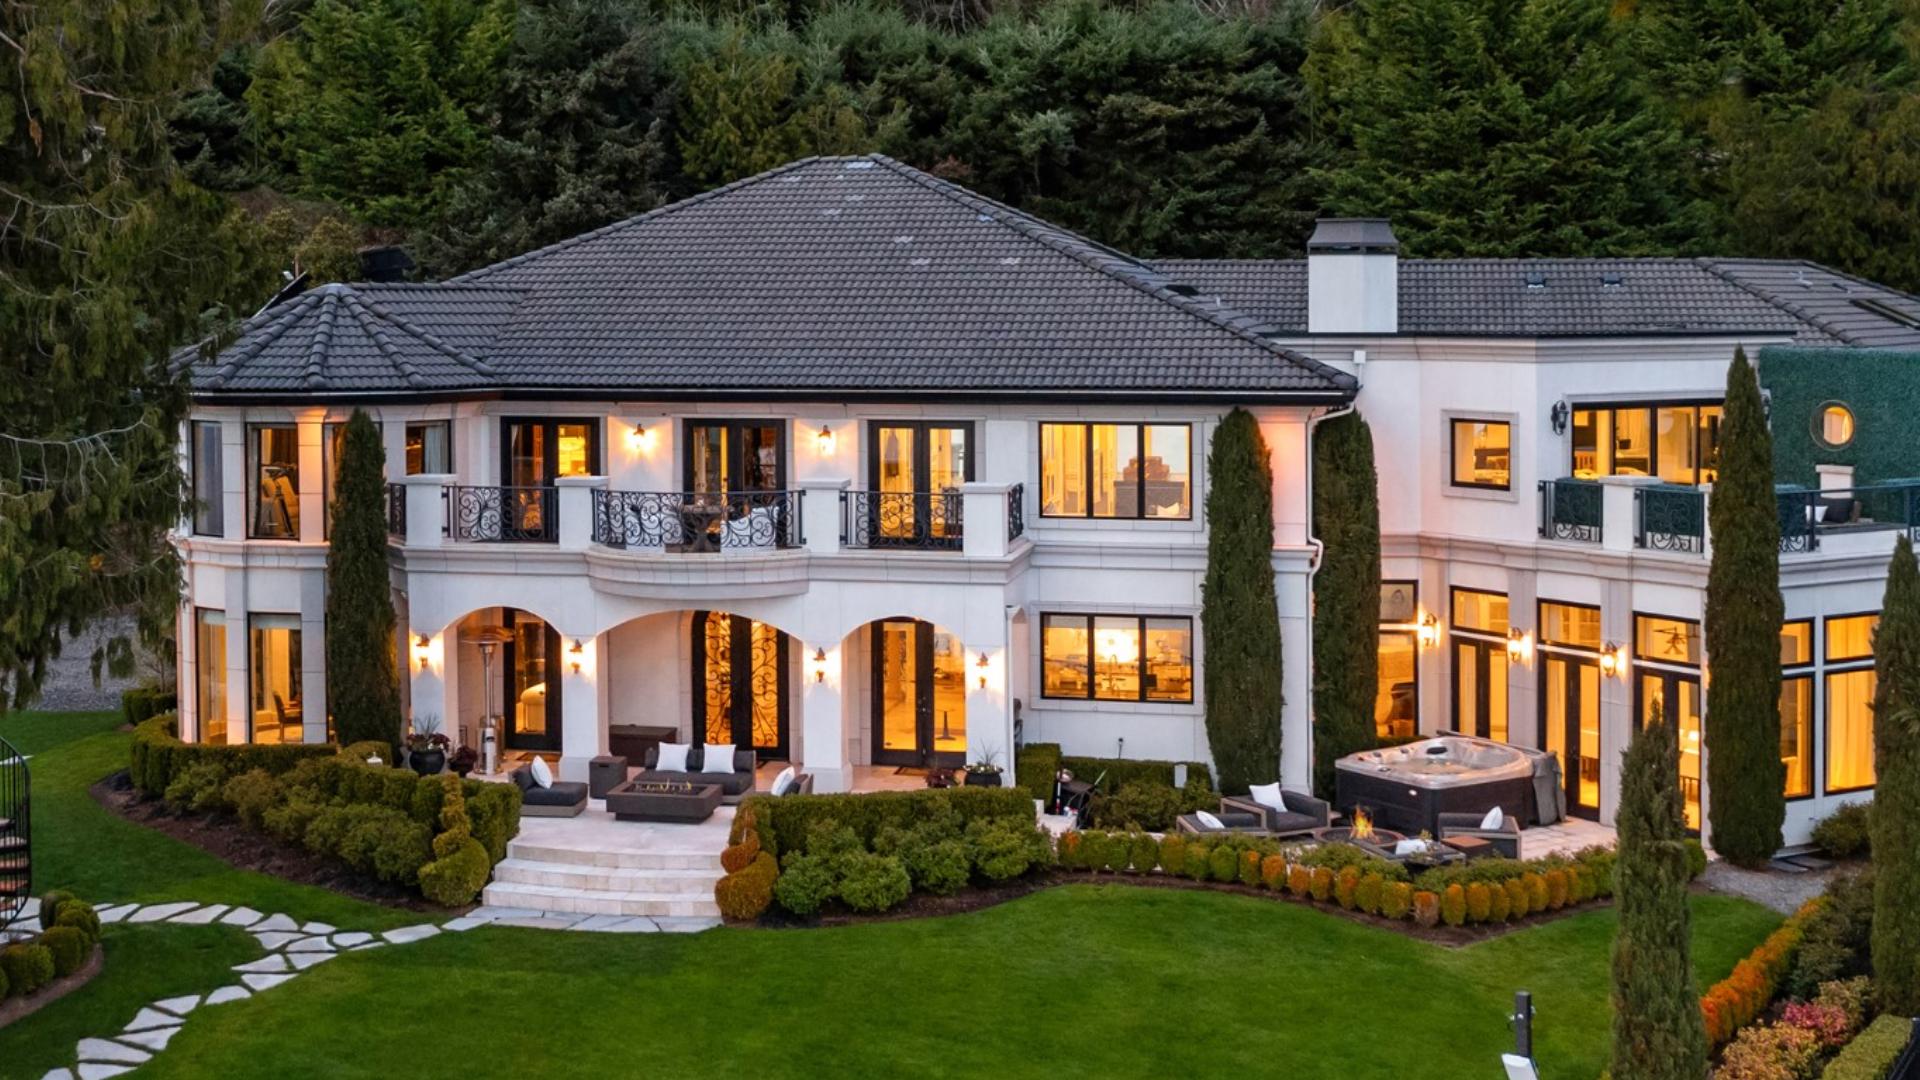 The home was recently listed for nearly $25 million.